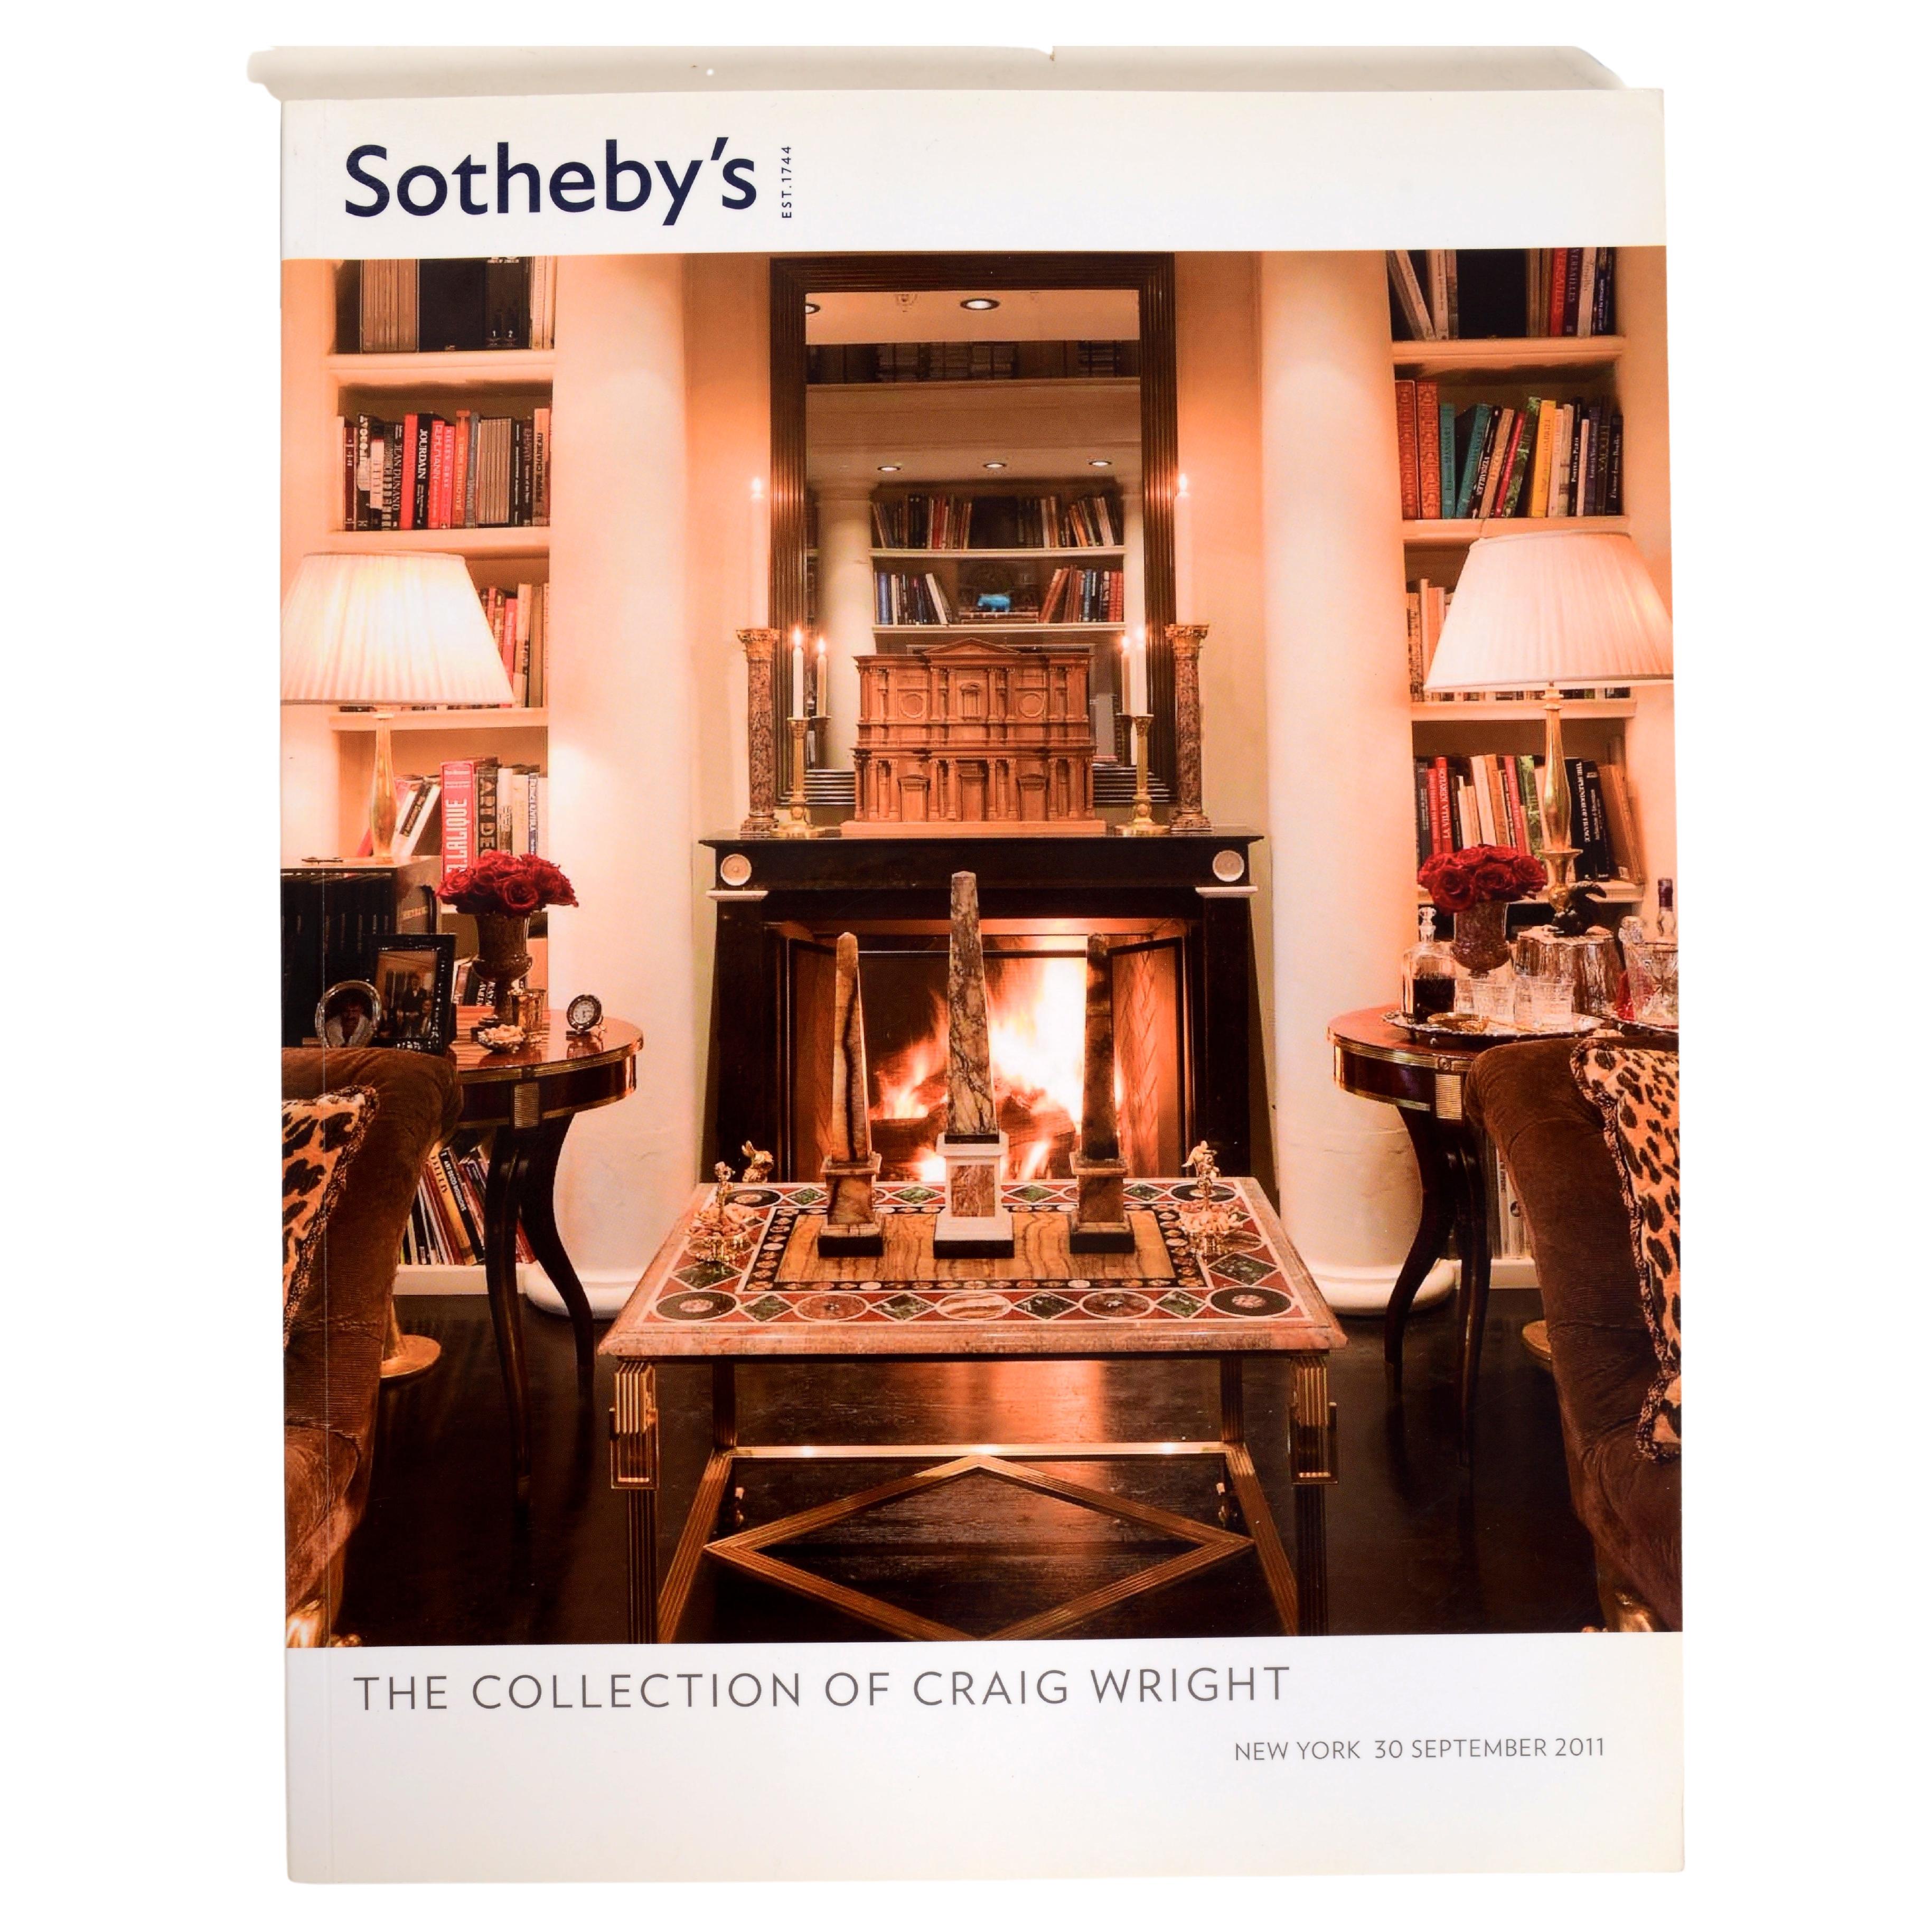 Sotheby's, The Collection of Craig Wright, New Yorker Auktionskatalog, September 2011 im Angebot